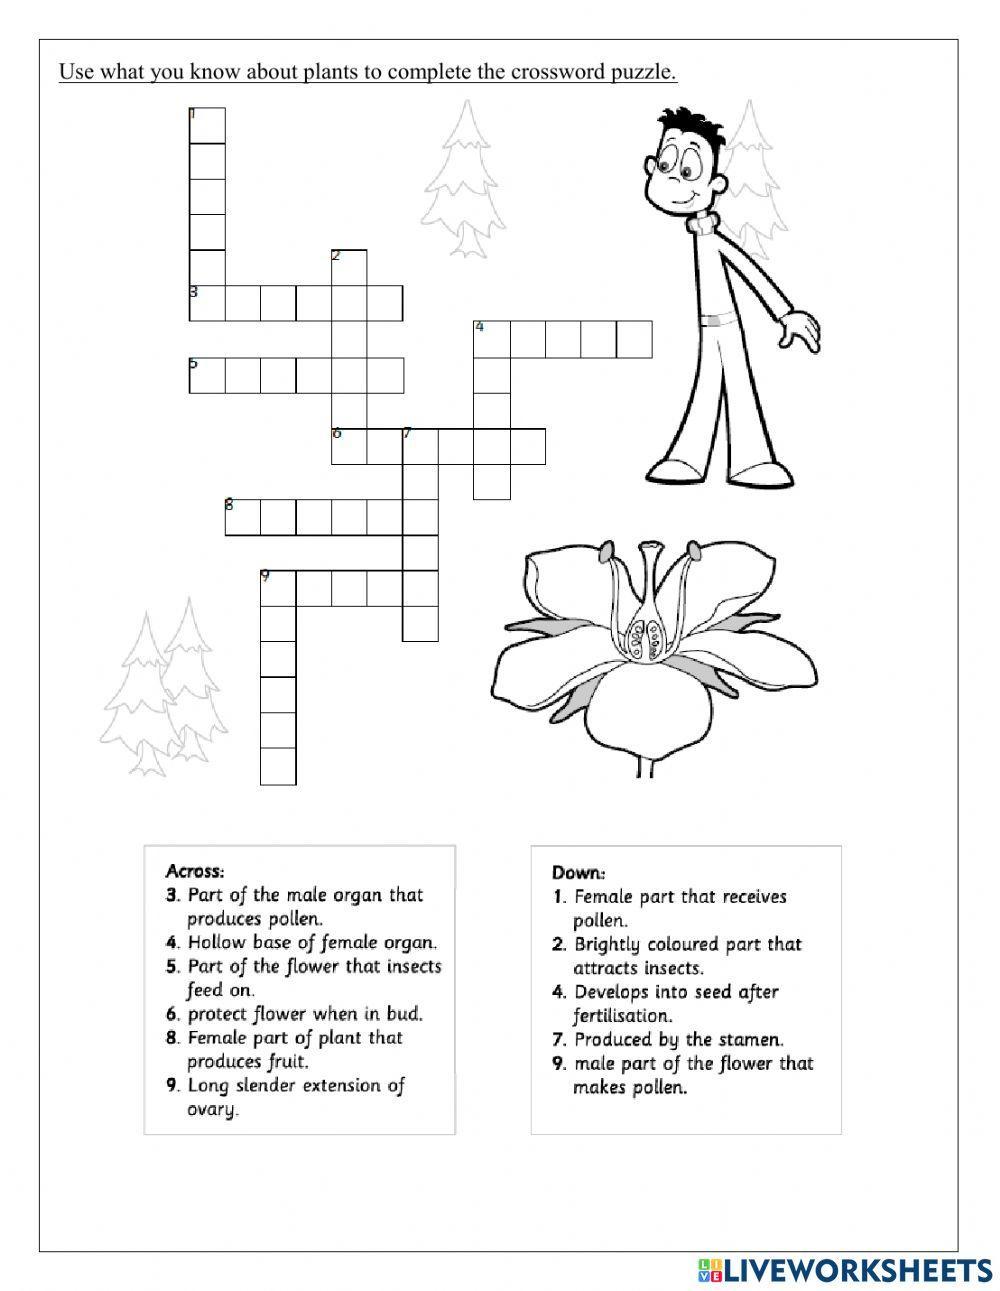 Parts of a flower crossword